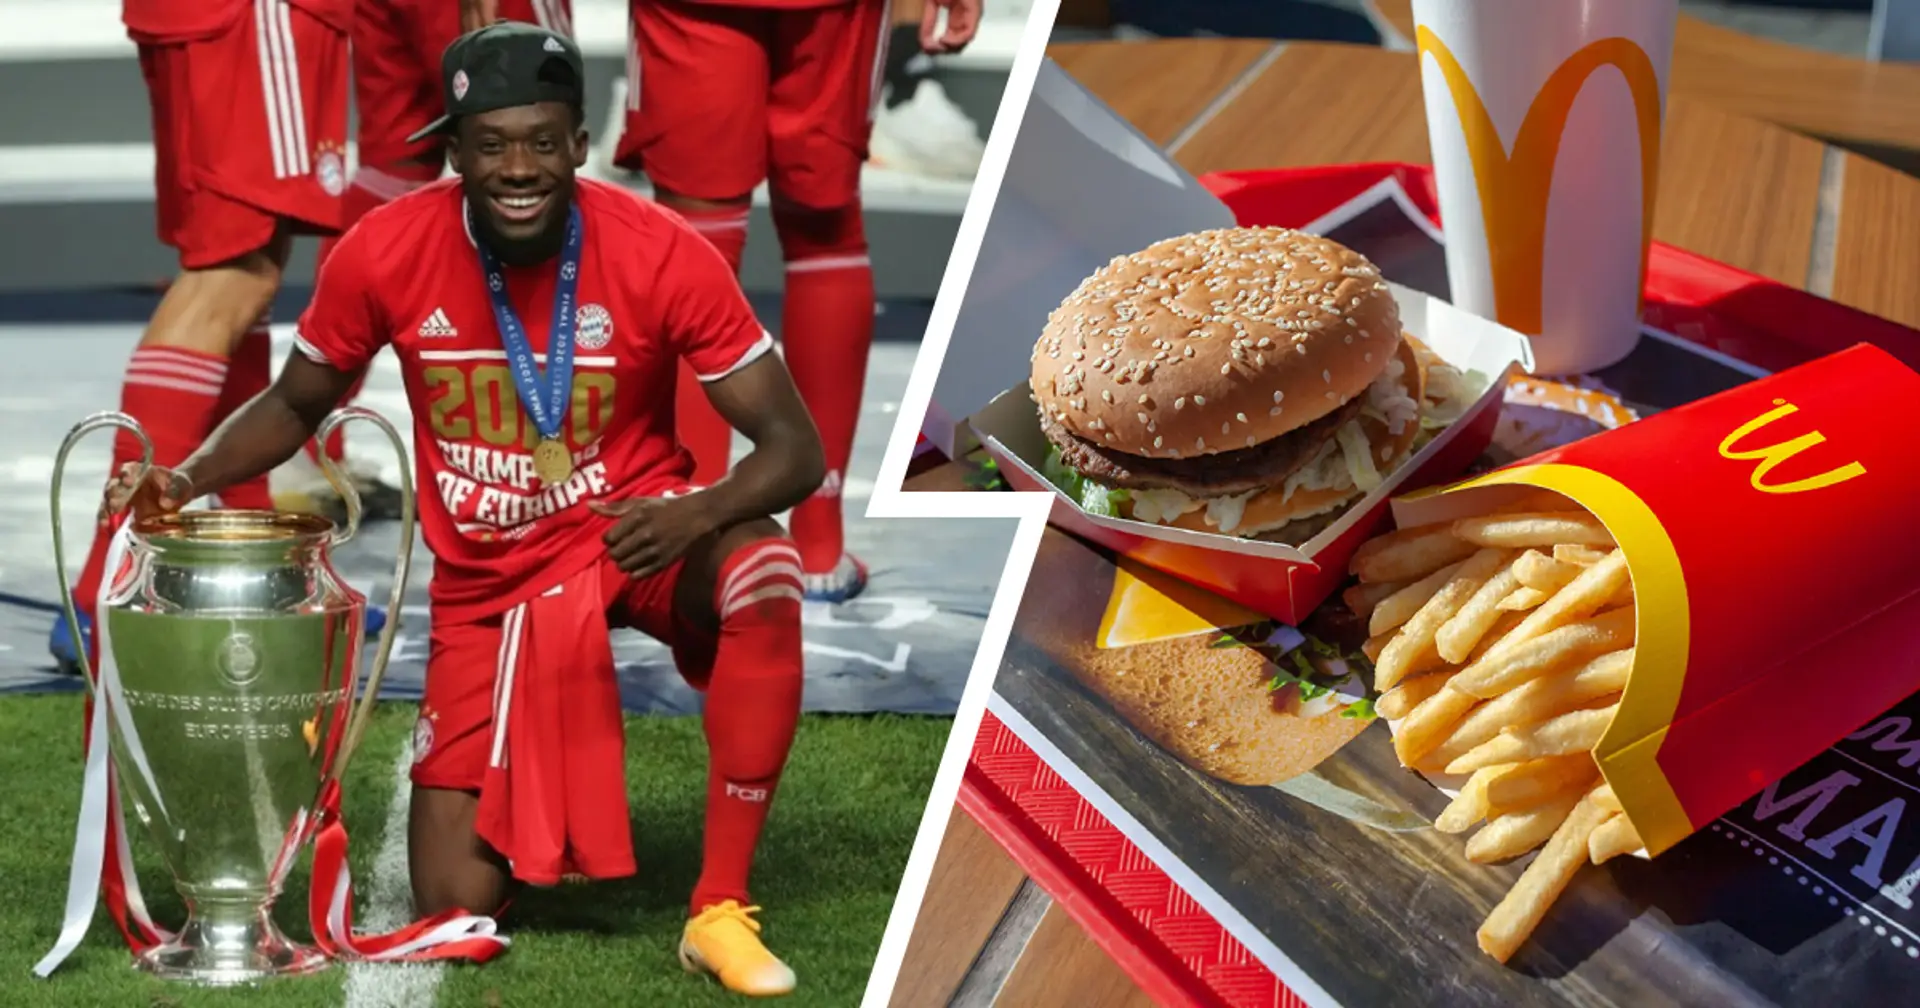 'I applied for a job in one of your restaurants': Bayern starlet Davies sends hilarious message to McDonald's